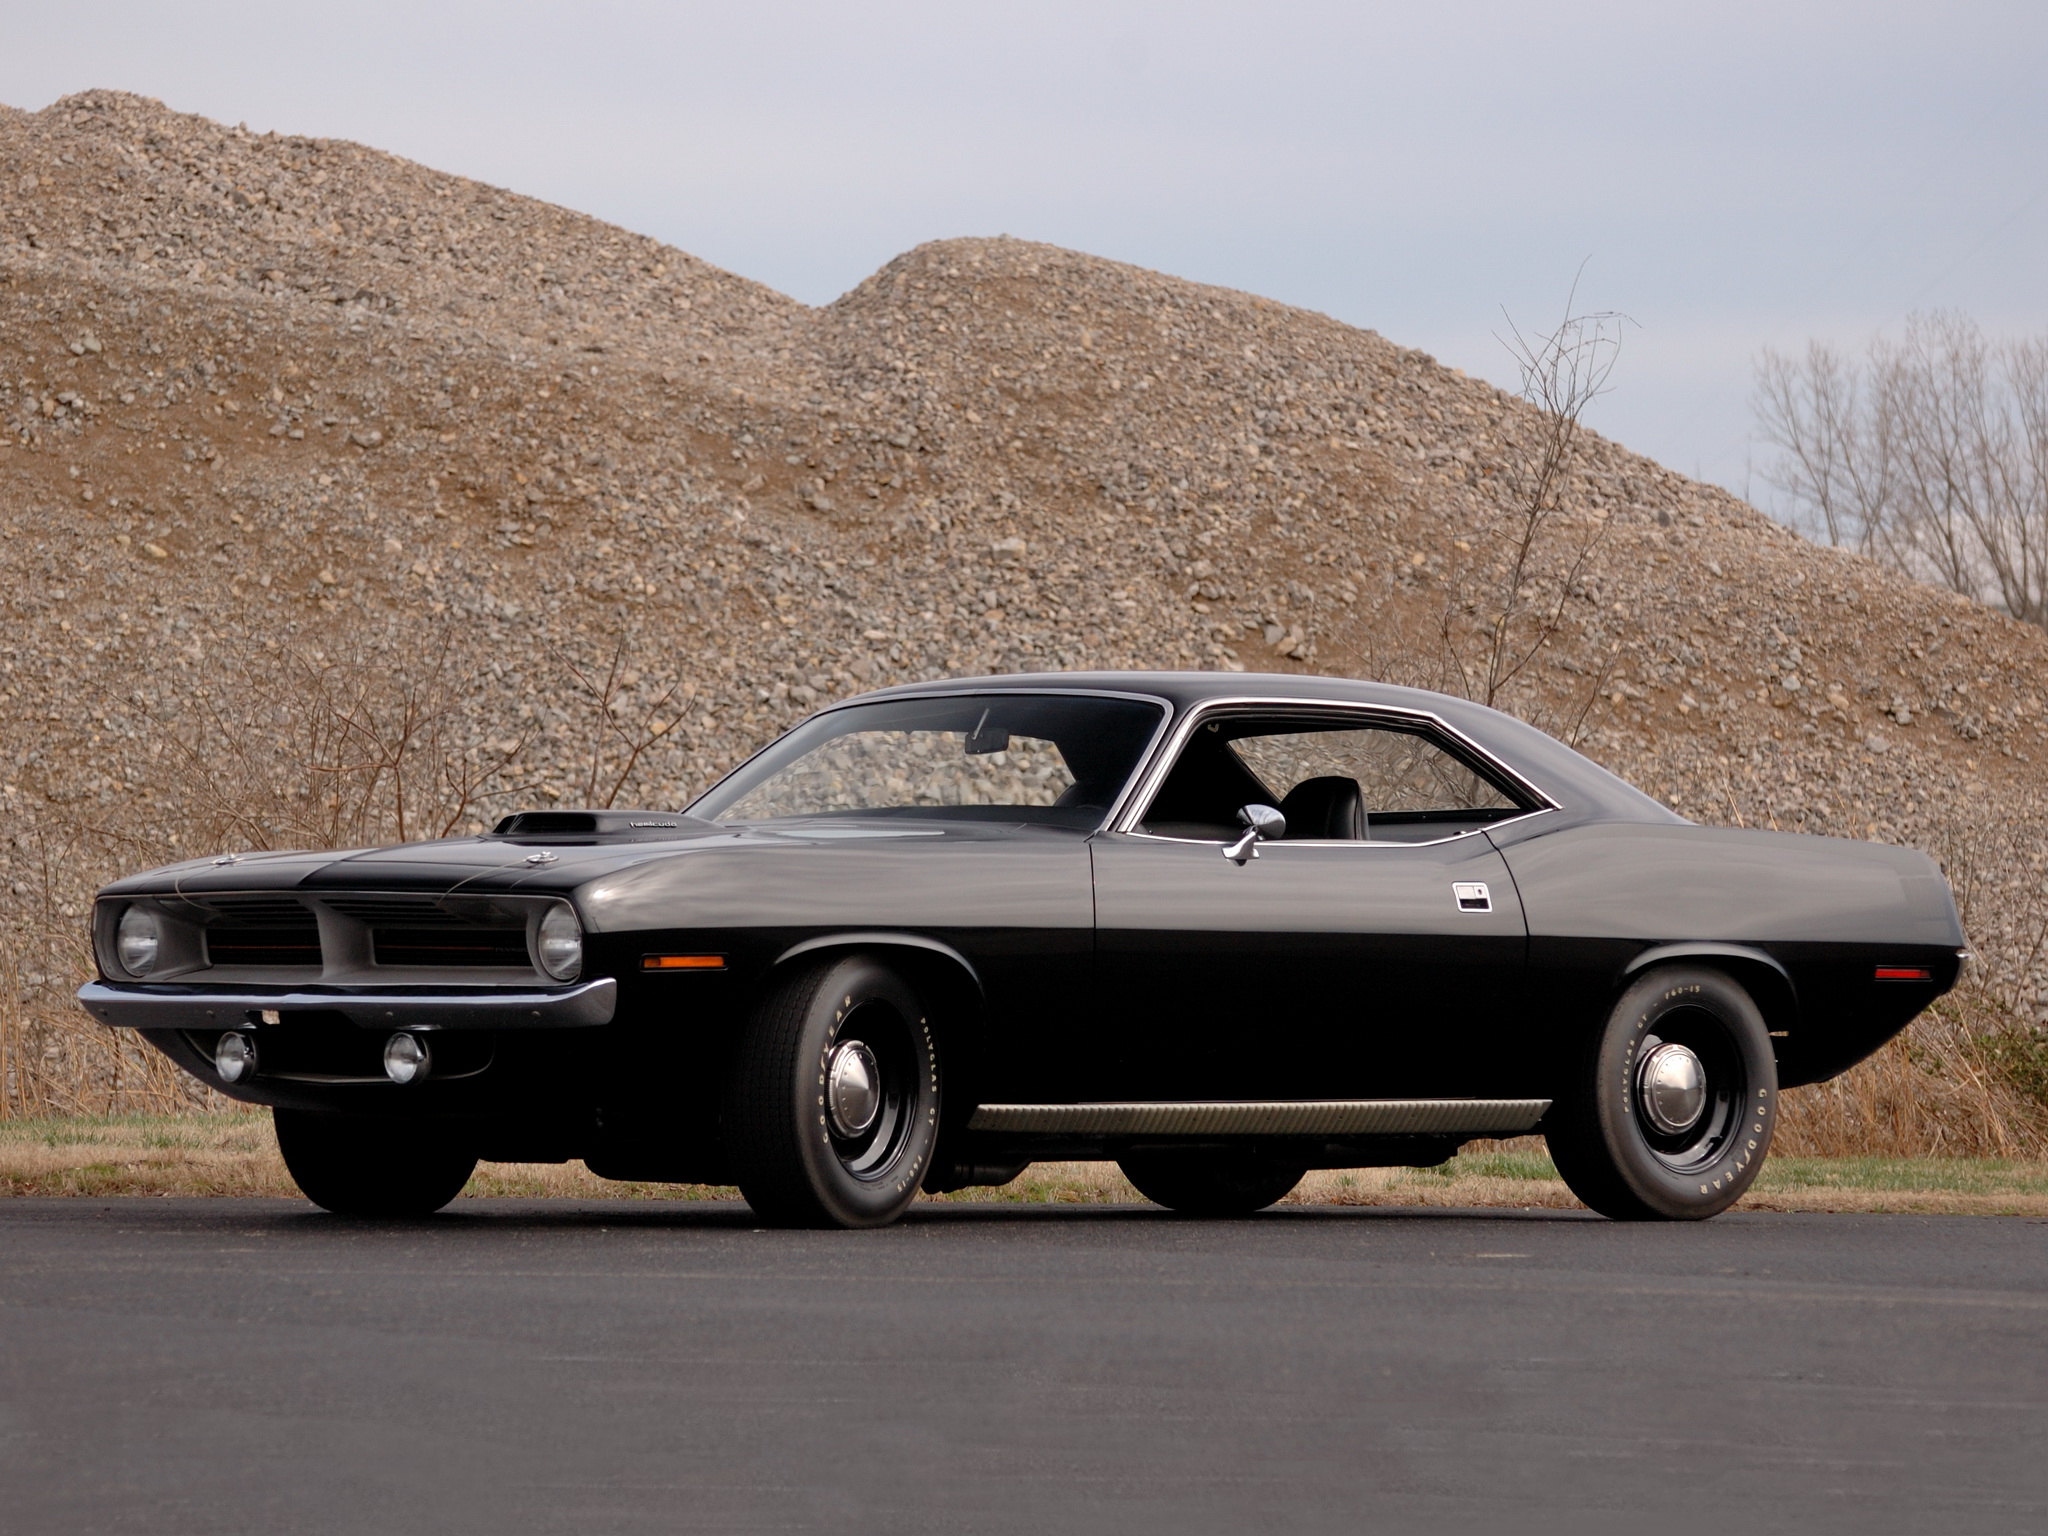 Daily Wallpaper Plymouth Barracuda I Like To Waste My Time